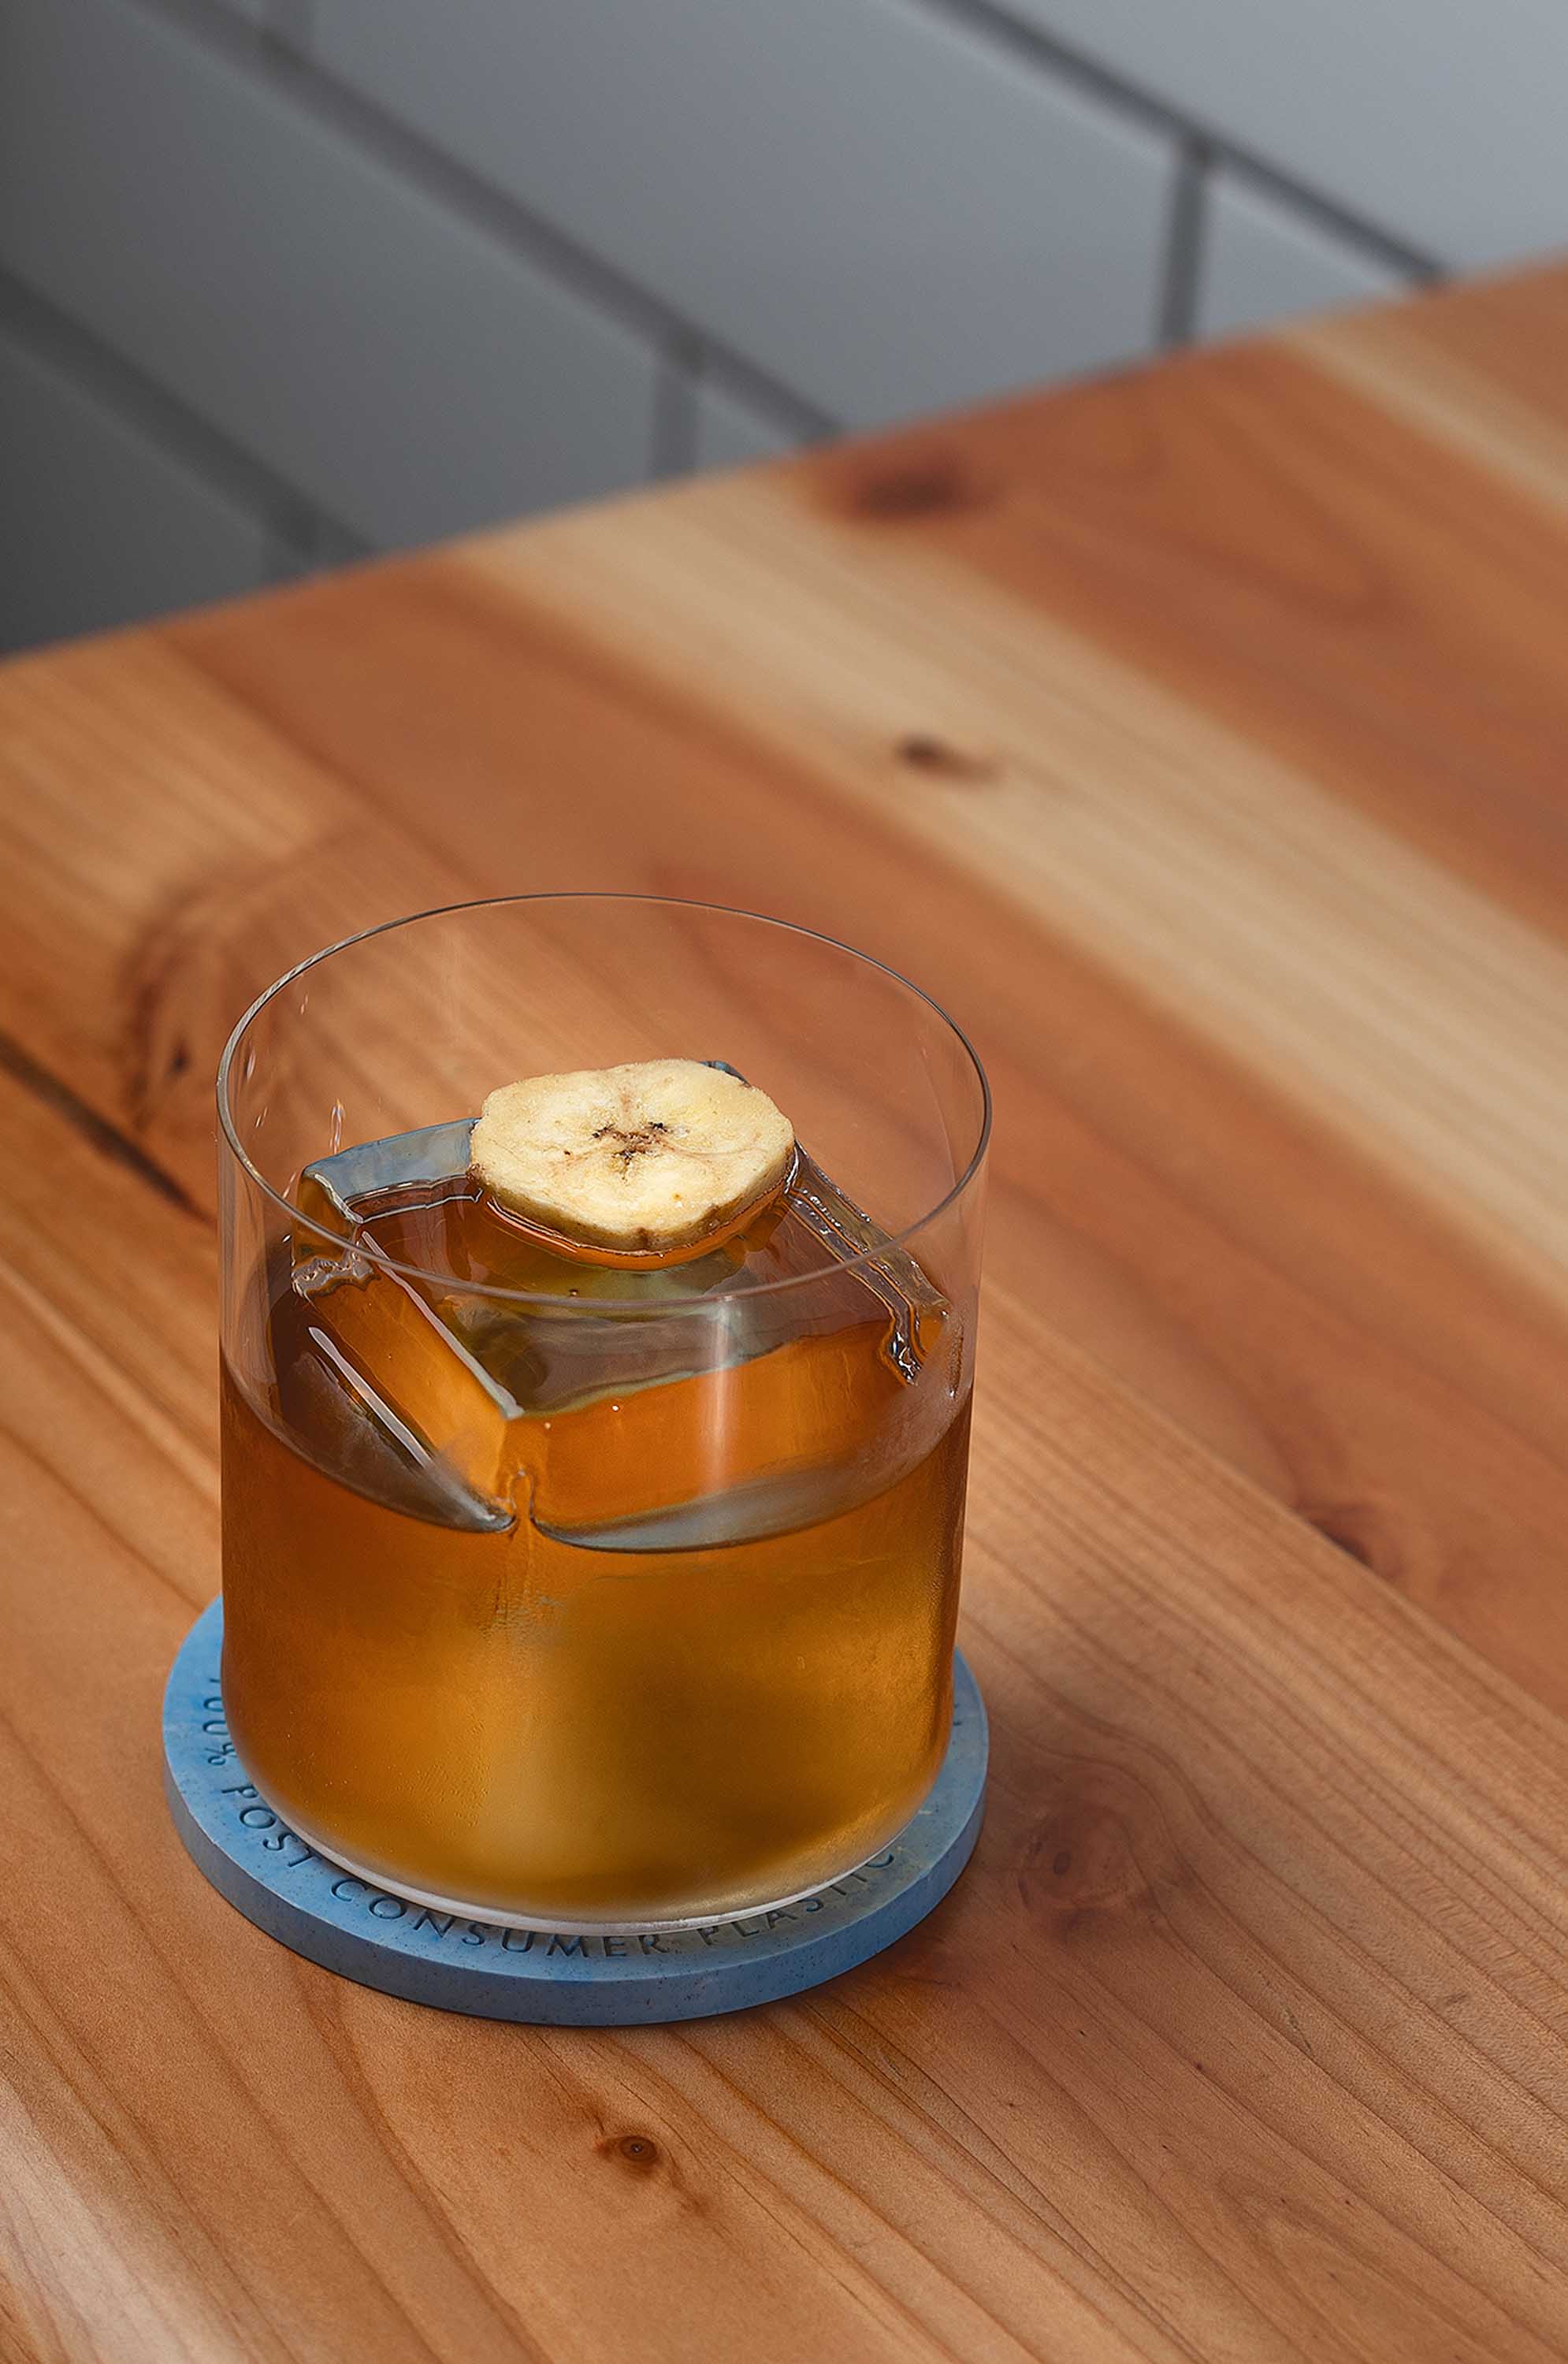 Banana and cacao make this Old Fashioned take pop